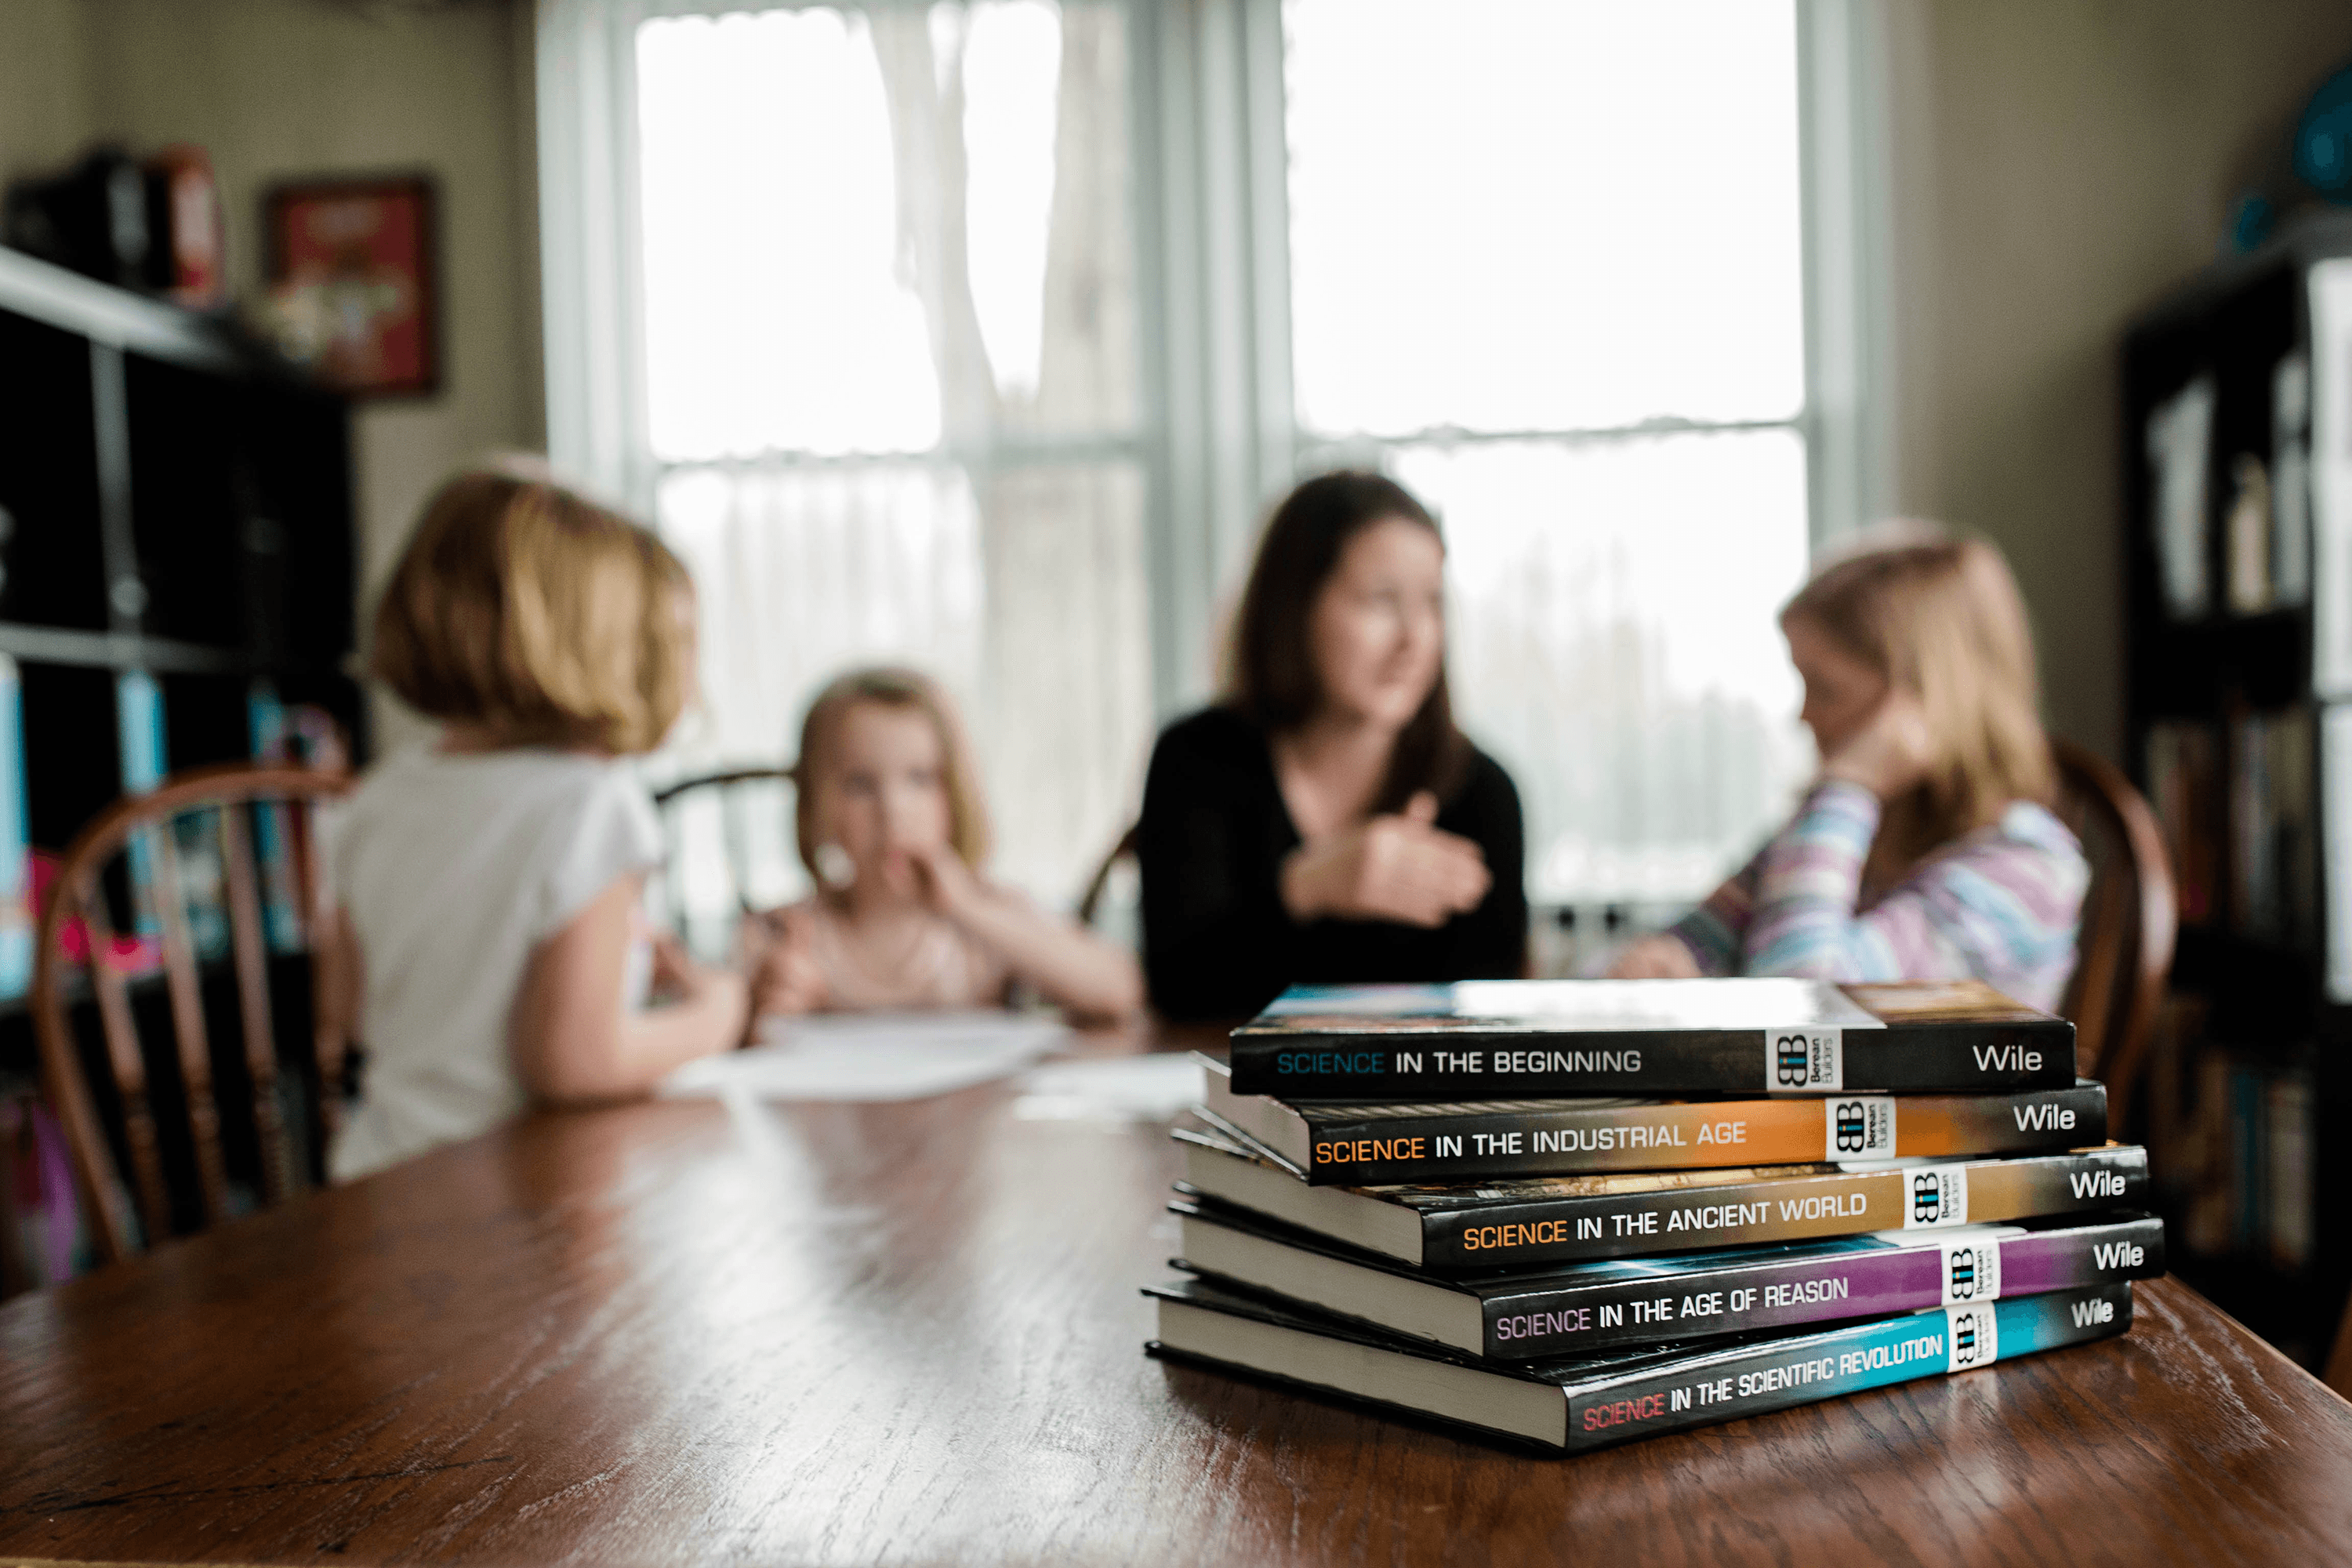 A stack of Berean Builders Elementary courses sits atop a dining table in the foreground while a mother speaks with her daughters around the table in the background